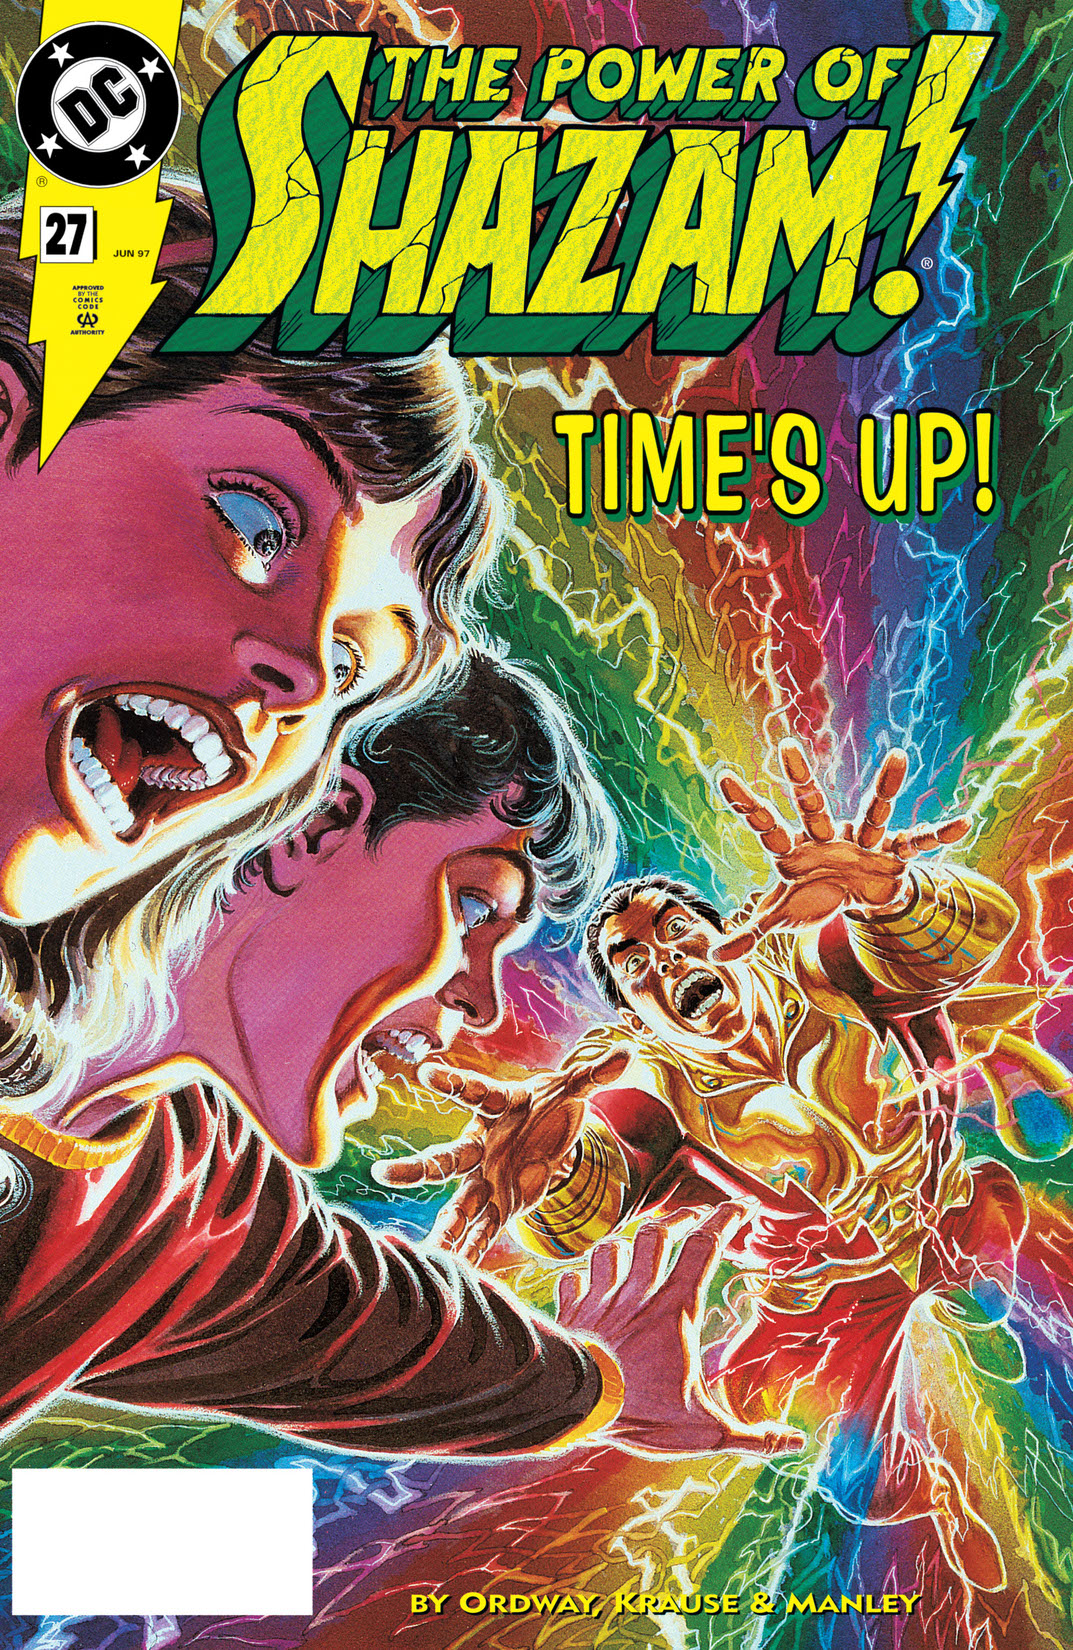 The Power of Shazam! #27 preview images